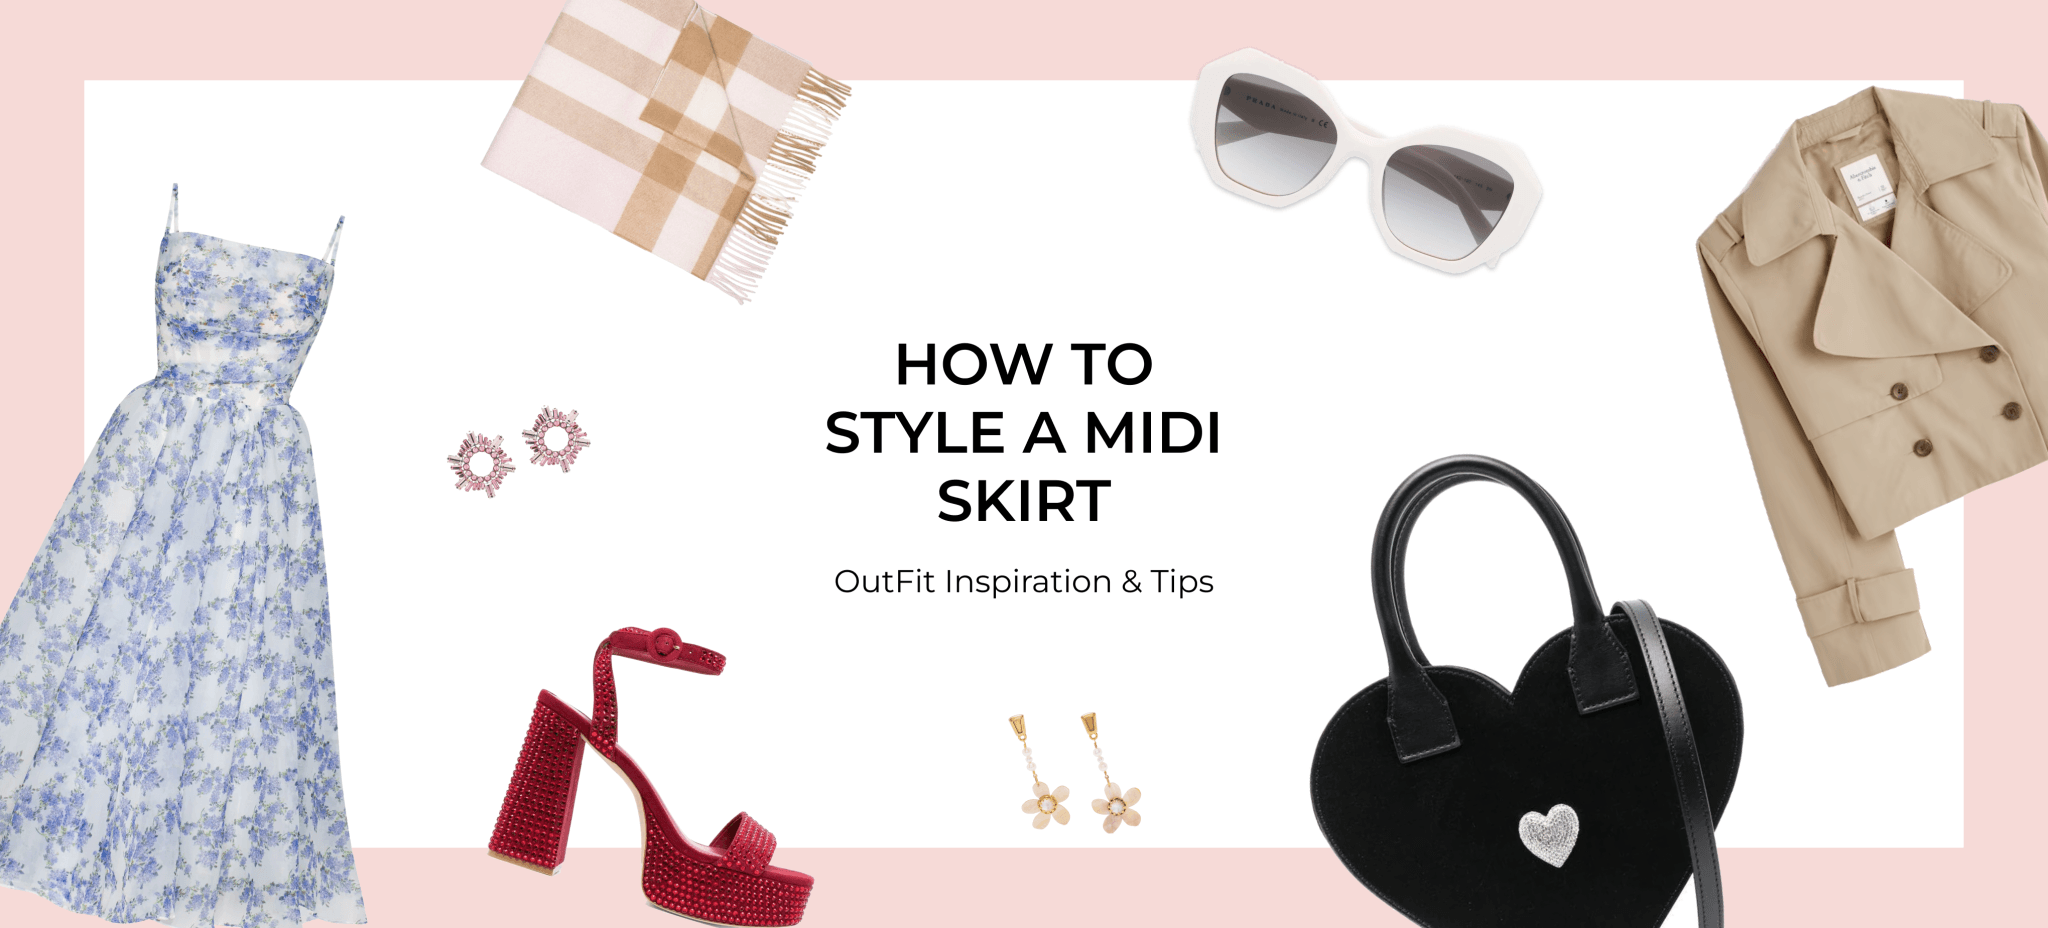 How to style a midi-length dress - Milla